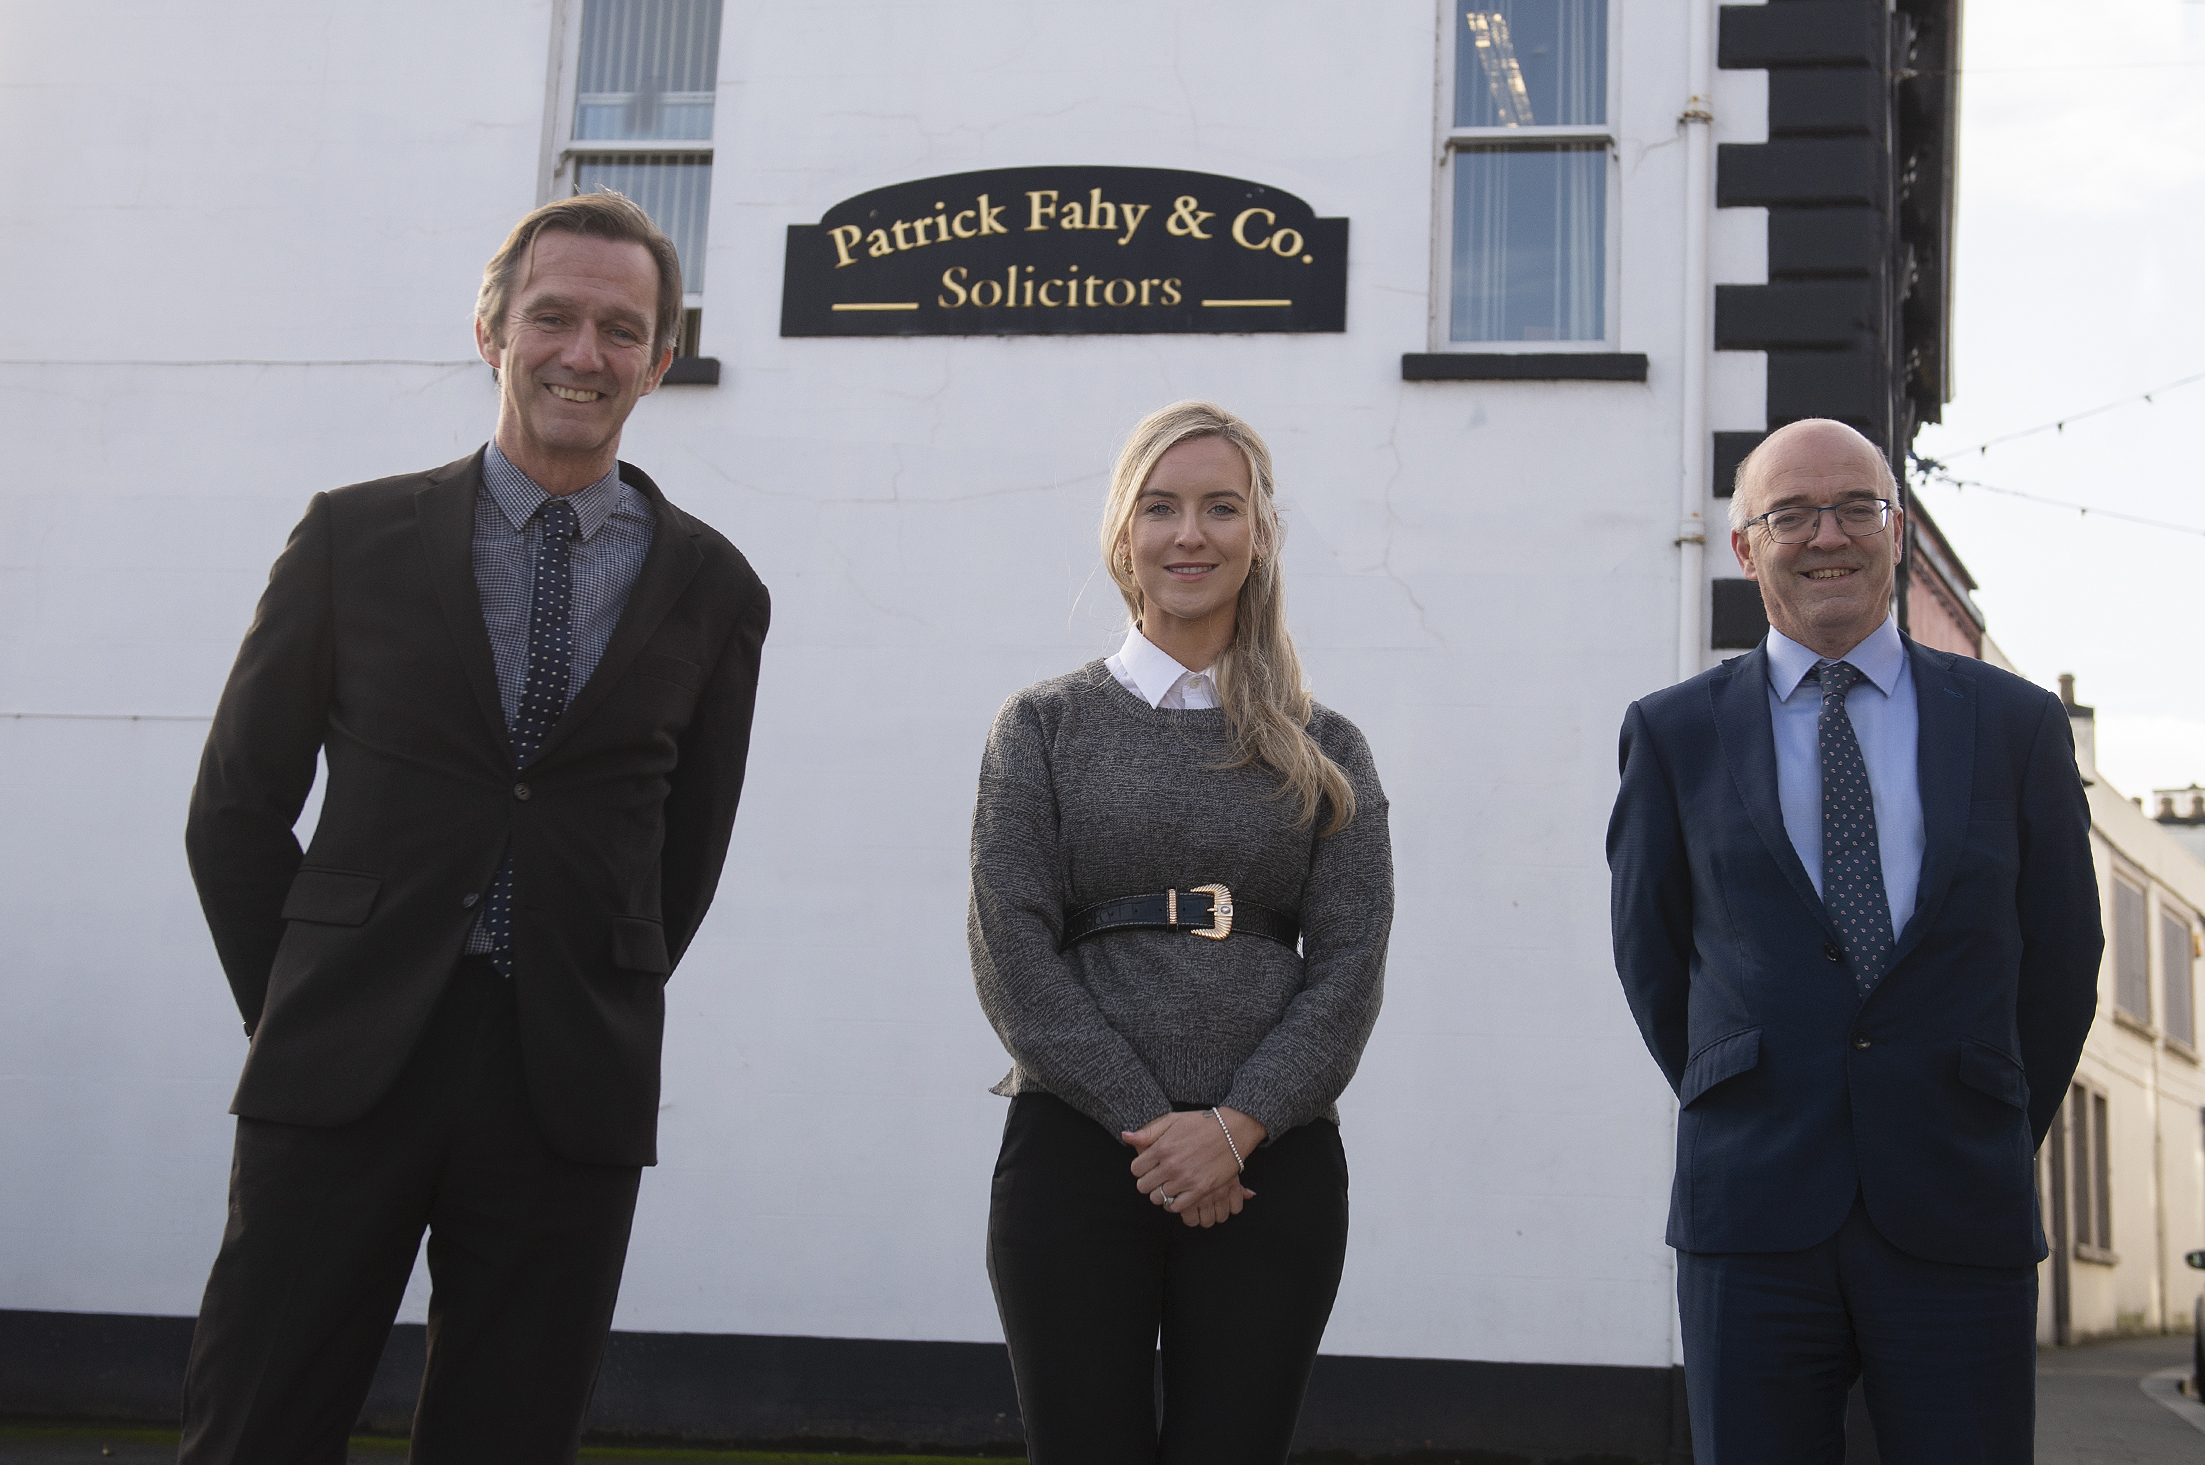 Local Business Profiles; Patrick Fahy & Co Solicitors